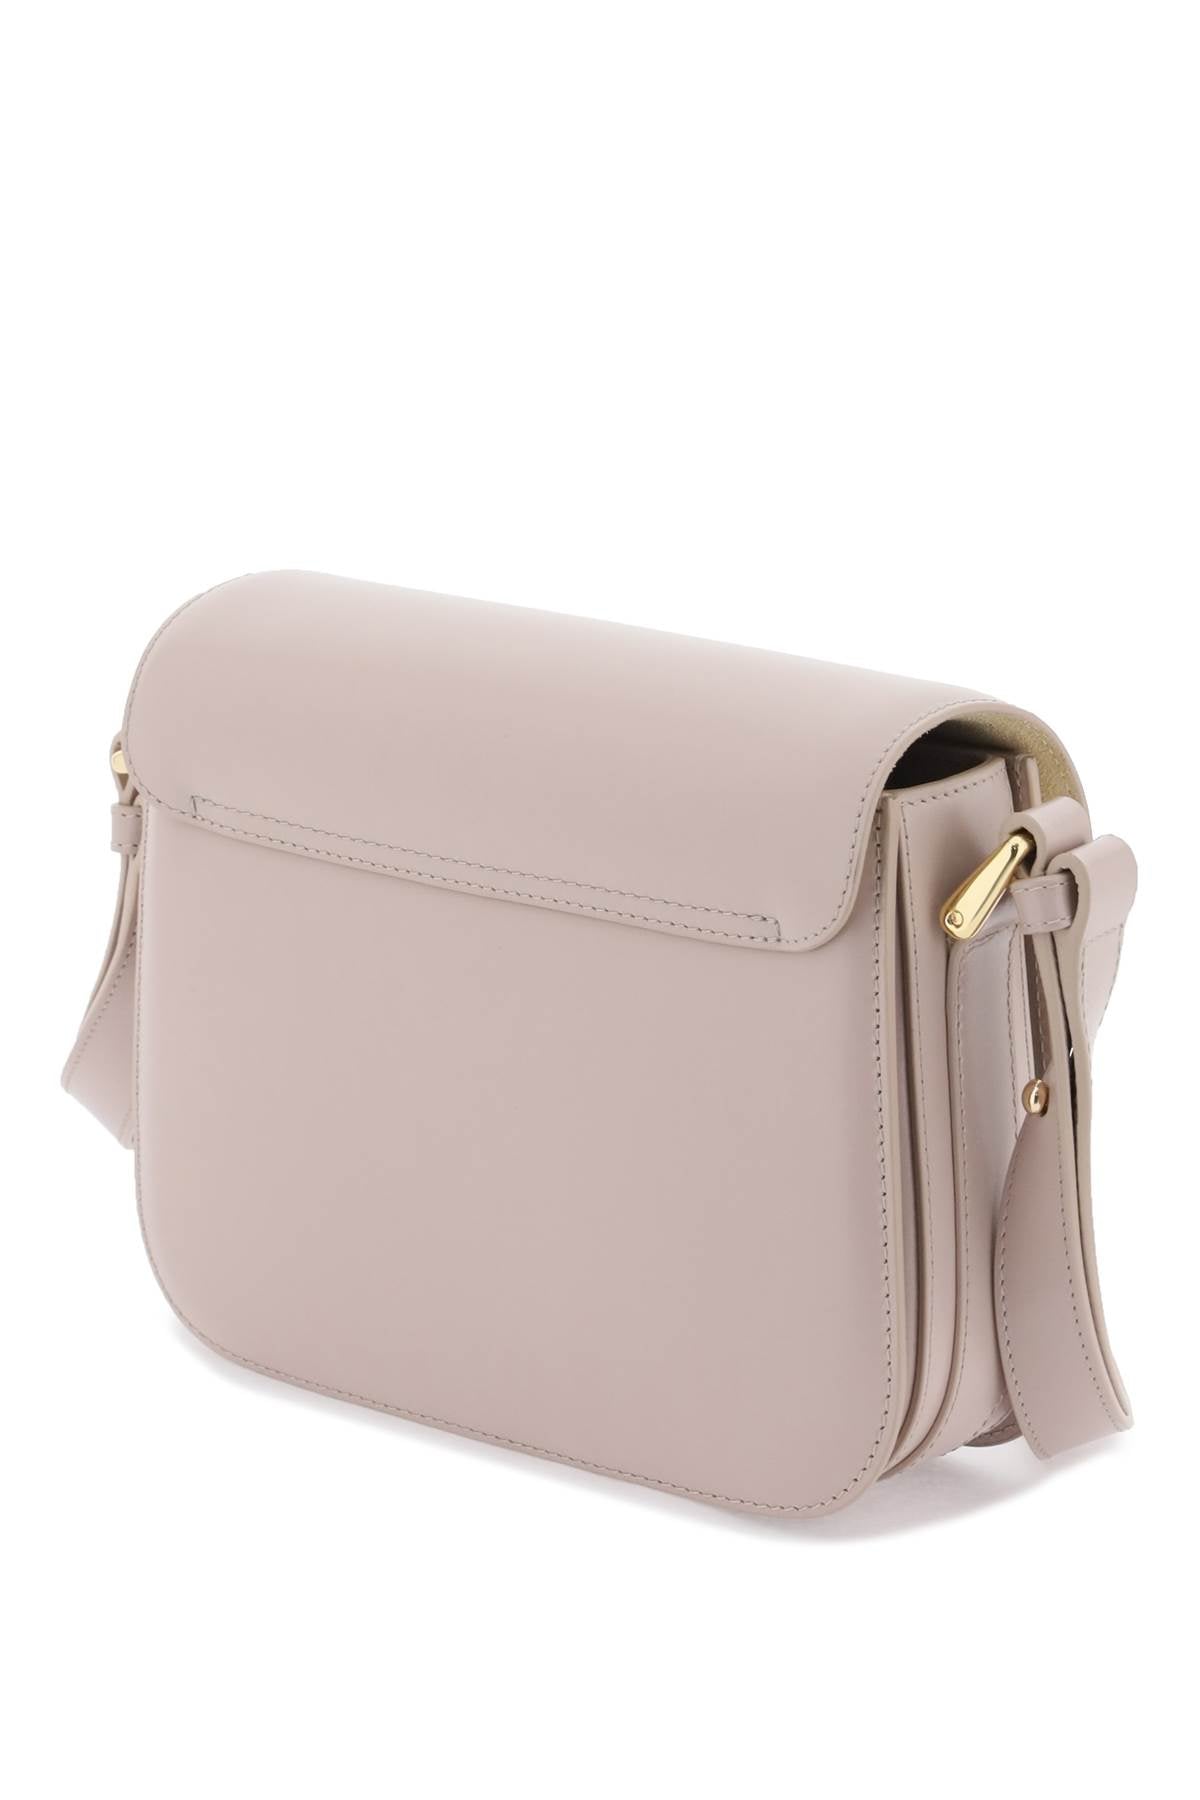 A.P.C. Grace Small Multicolor Leather Crossbody Bag with Gold-Tone Accents